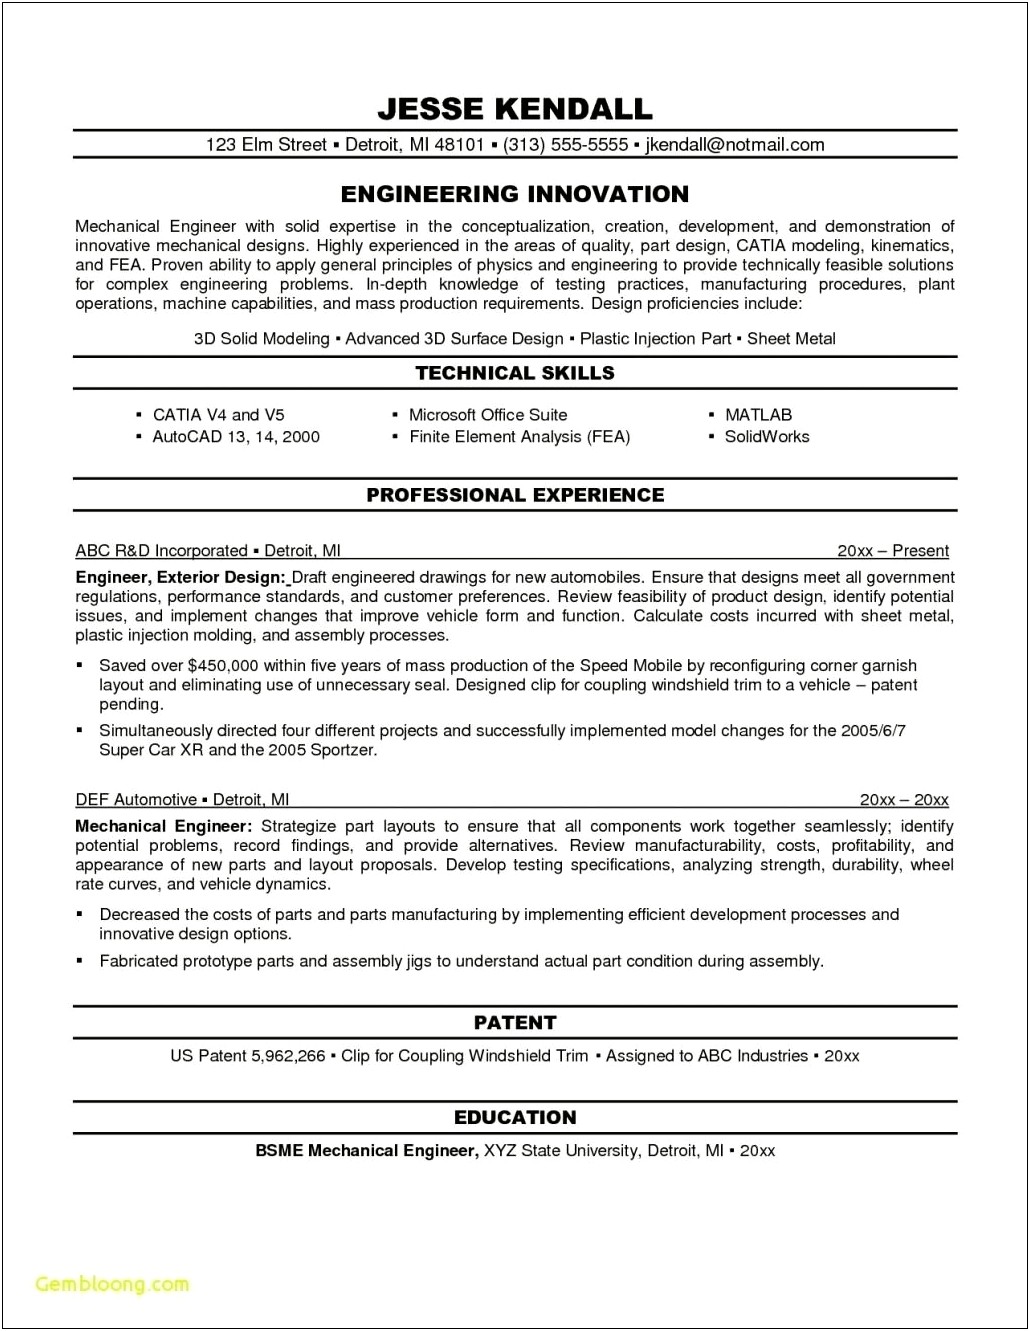 Samples Of Career Objectives For A Resume